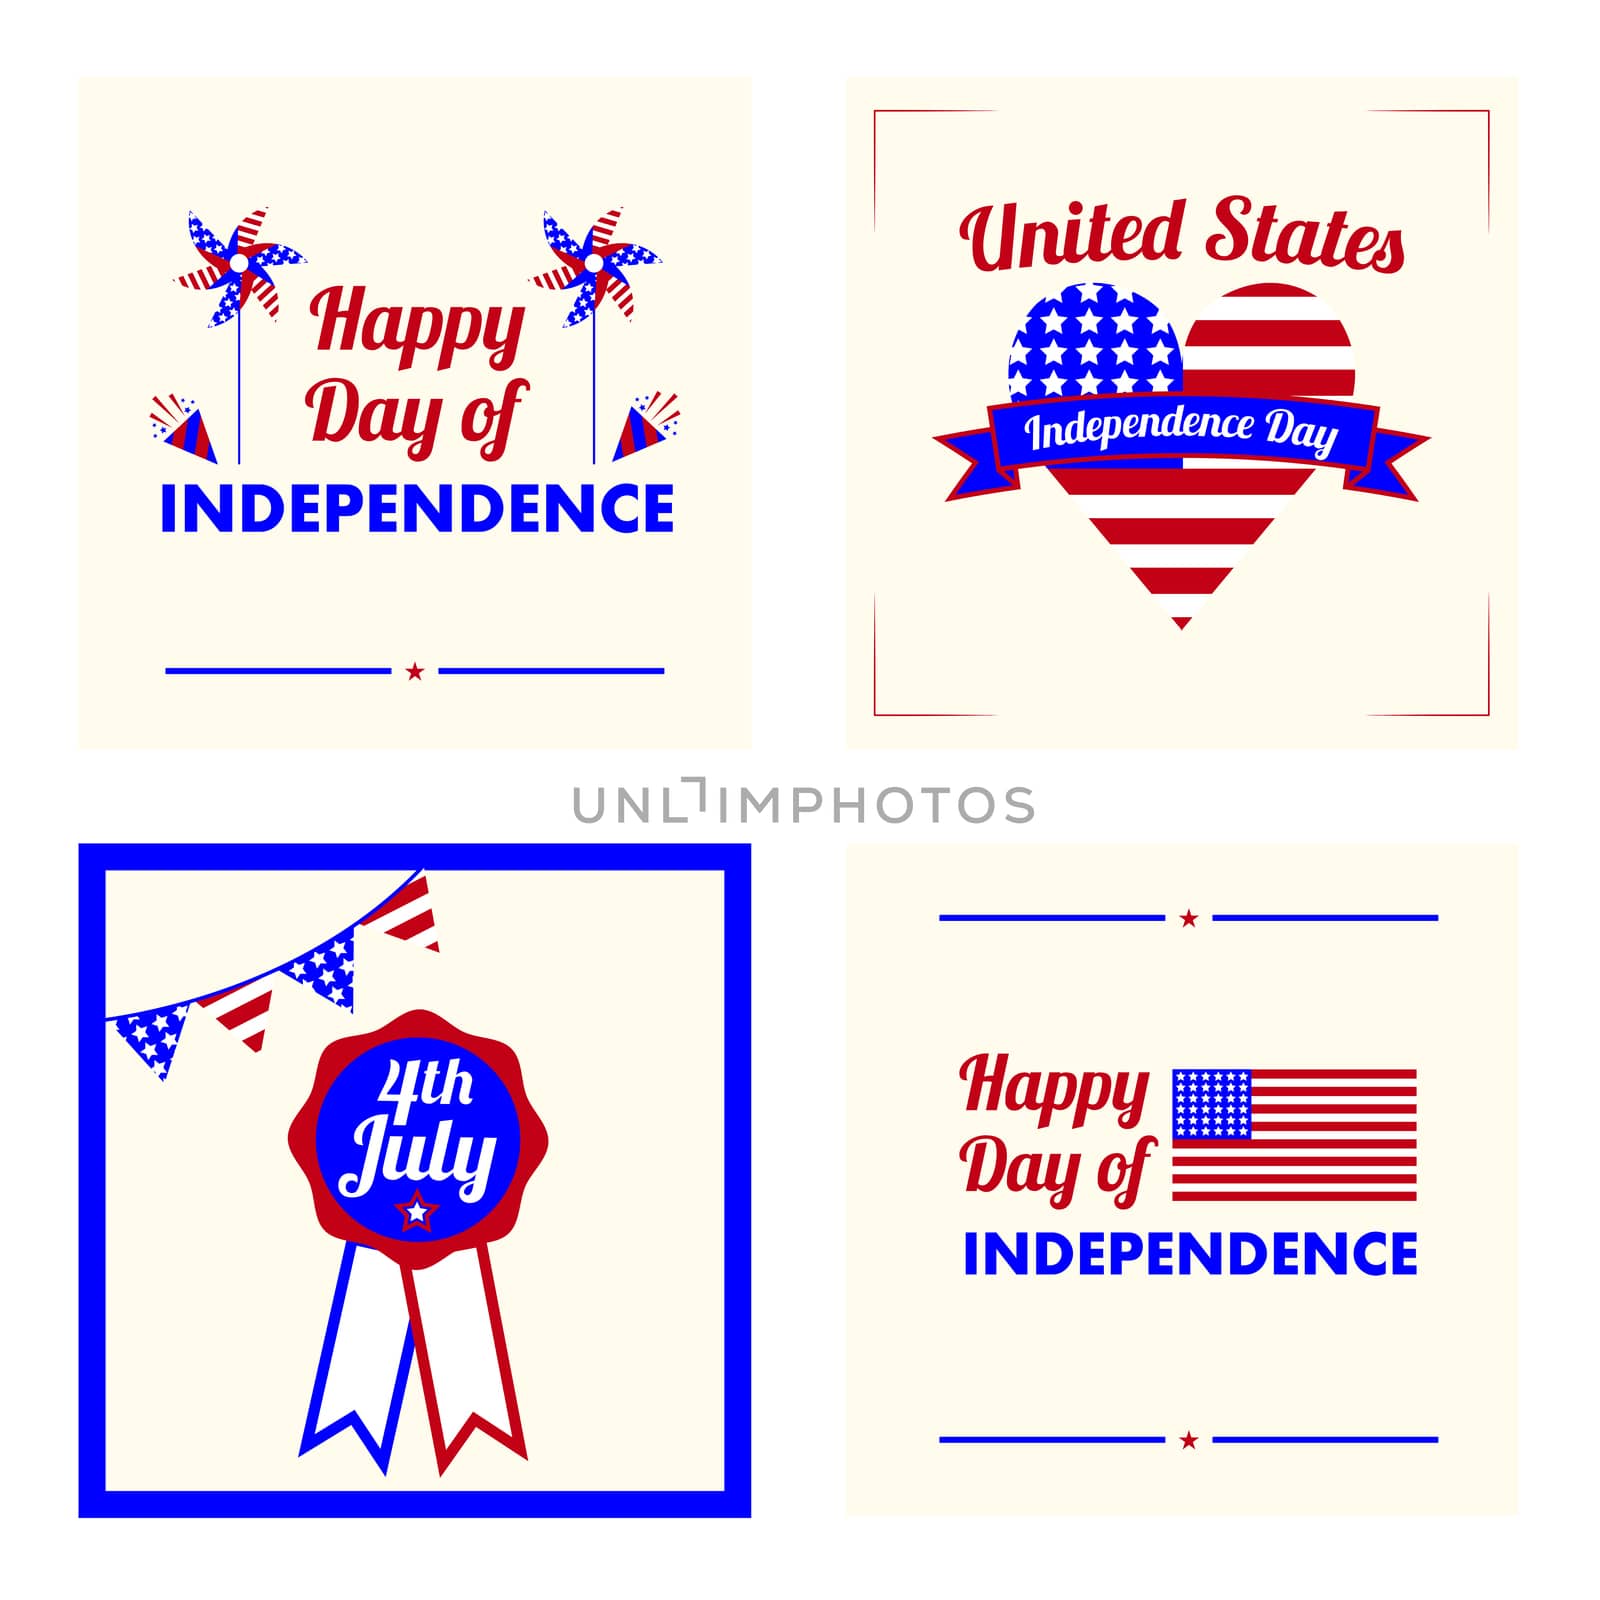 Card with happy independence day text by Wavebreakmedia